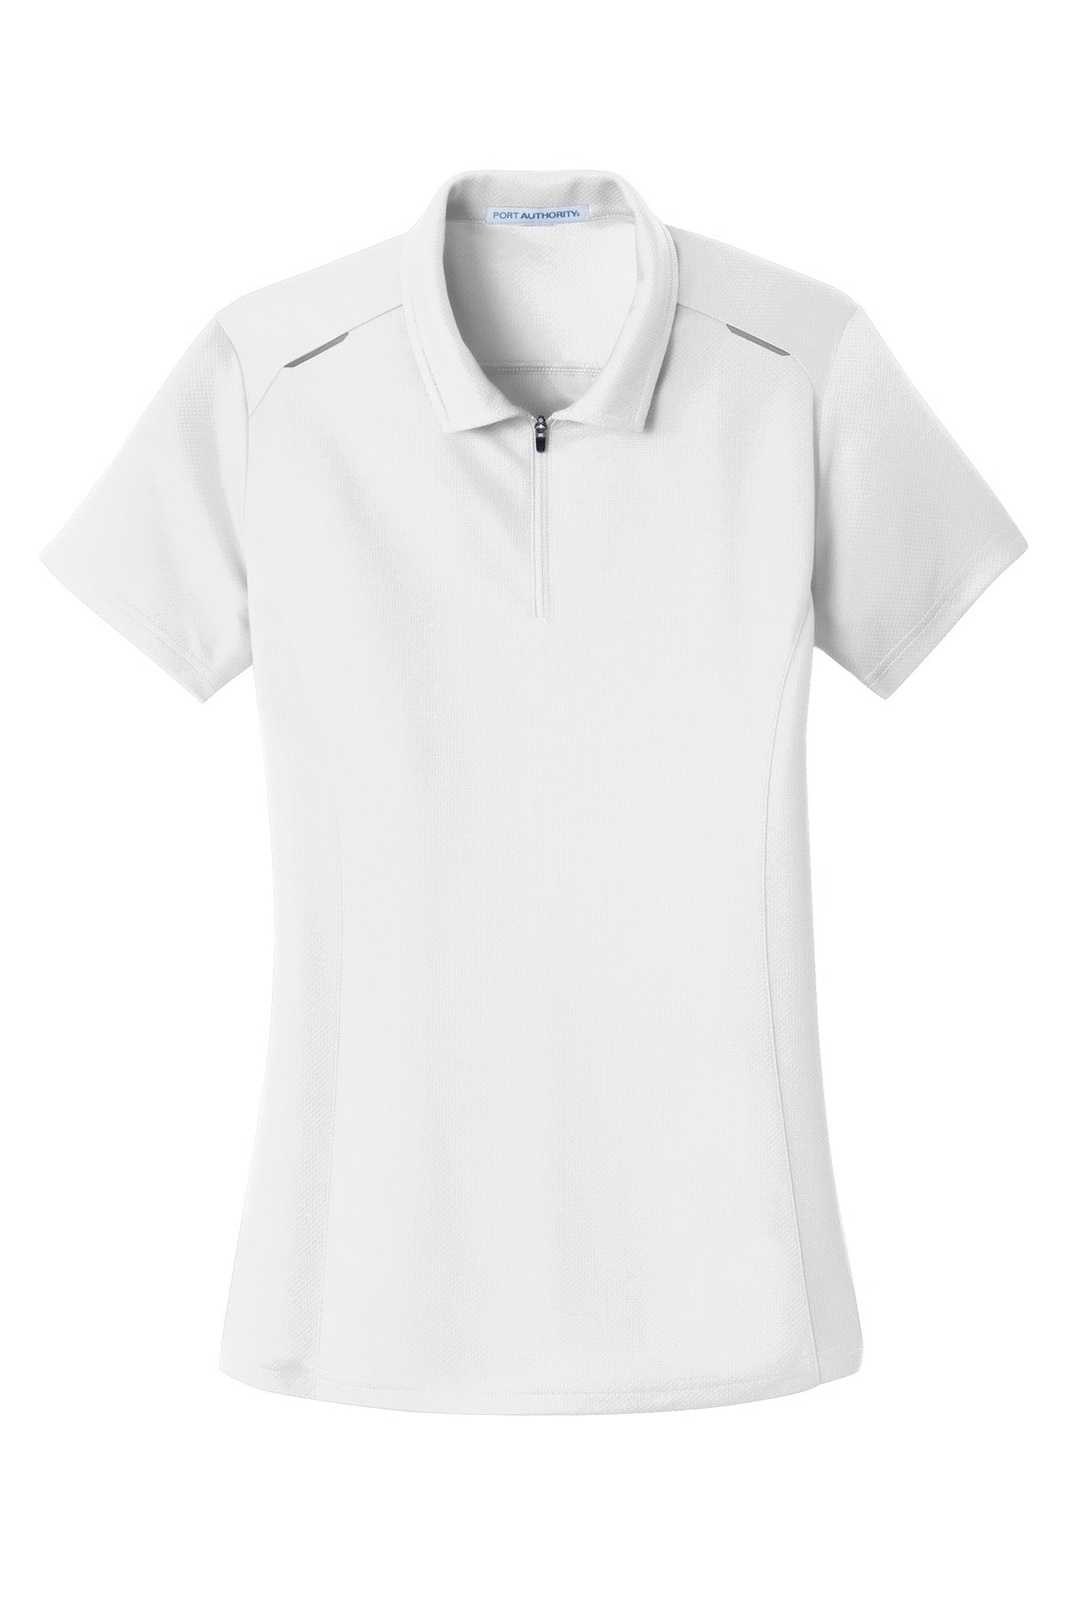 Port Authority L580 Ladies Pinpoint Mesh Zip Polo - White - HIT a Double - 5